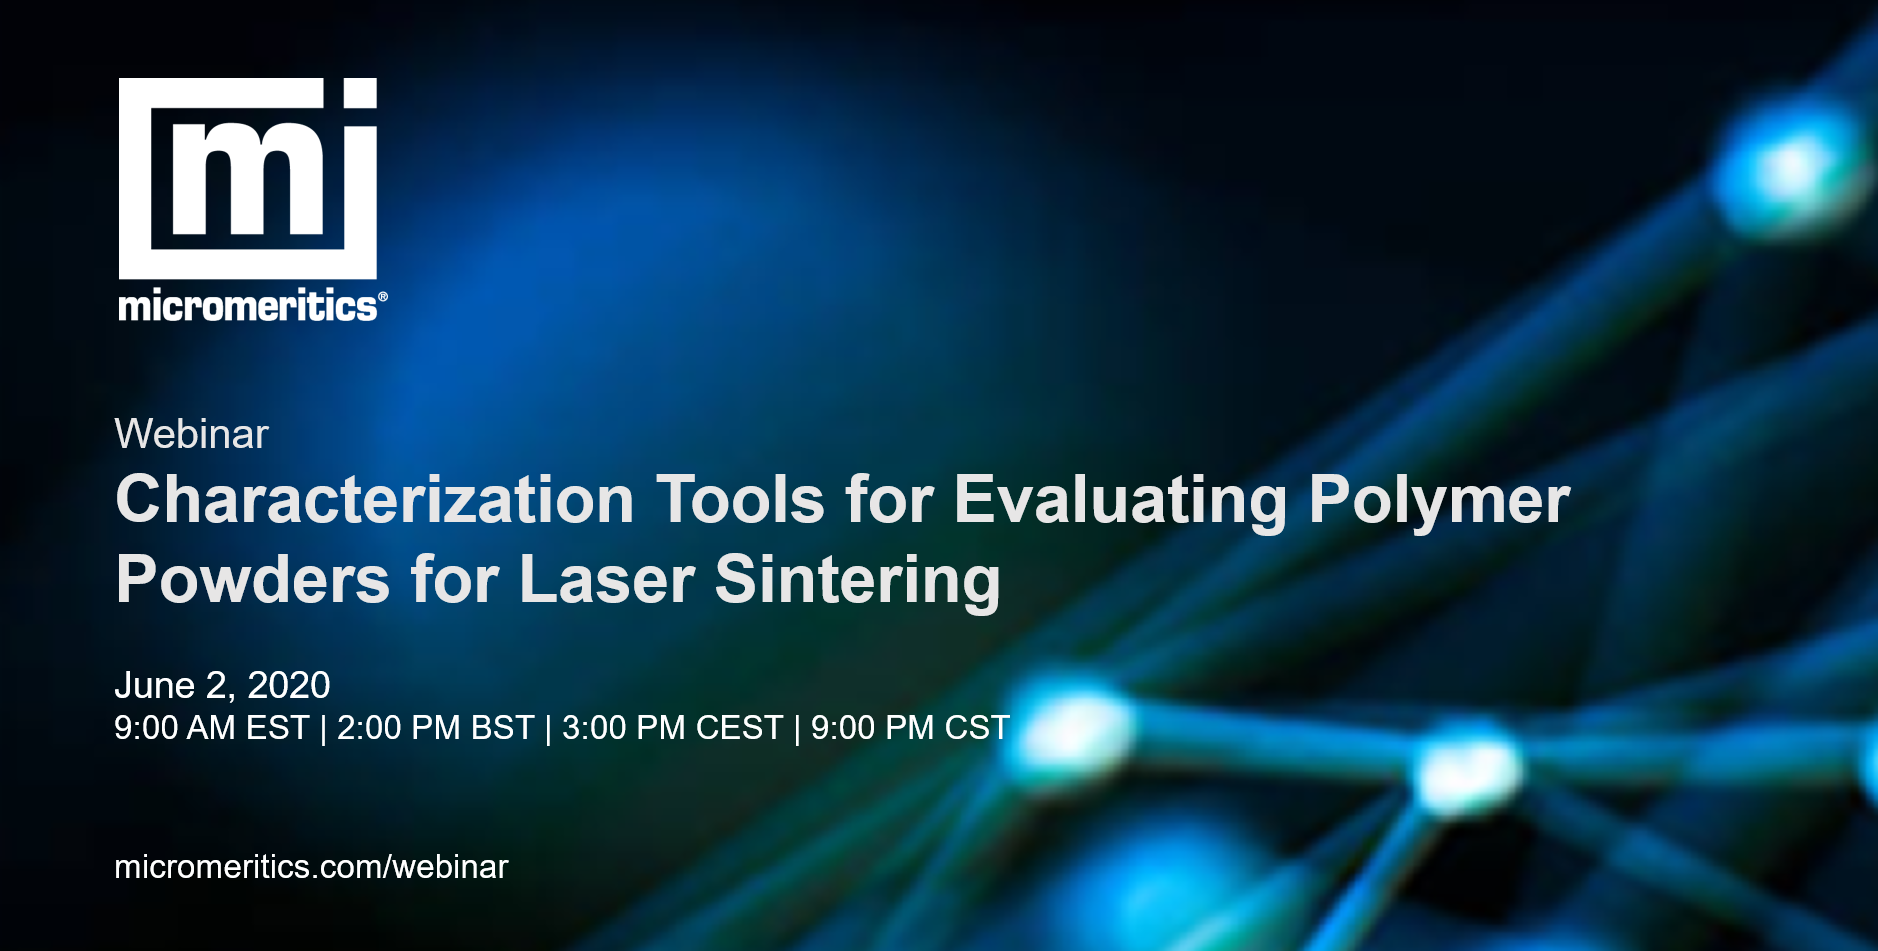 Webinar - Characterization tools for evaluating polymer powders for laser sintering